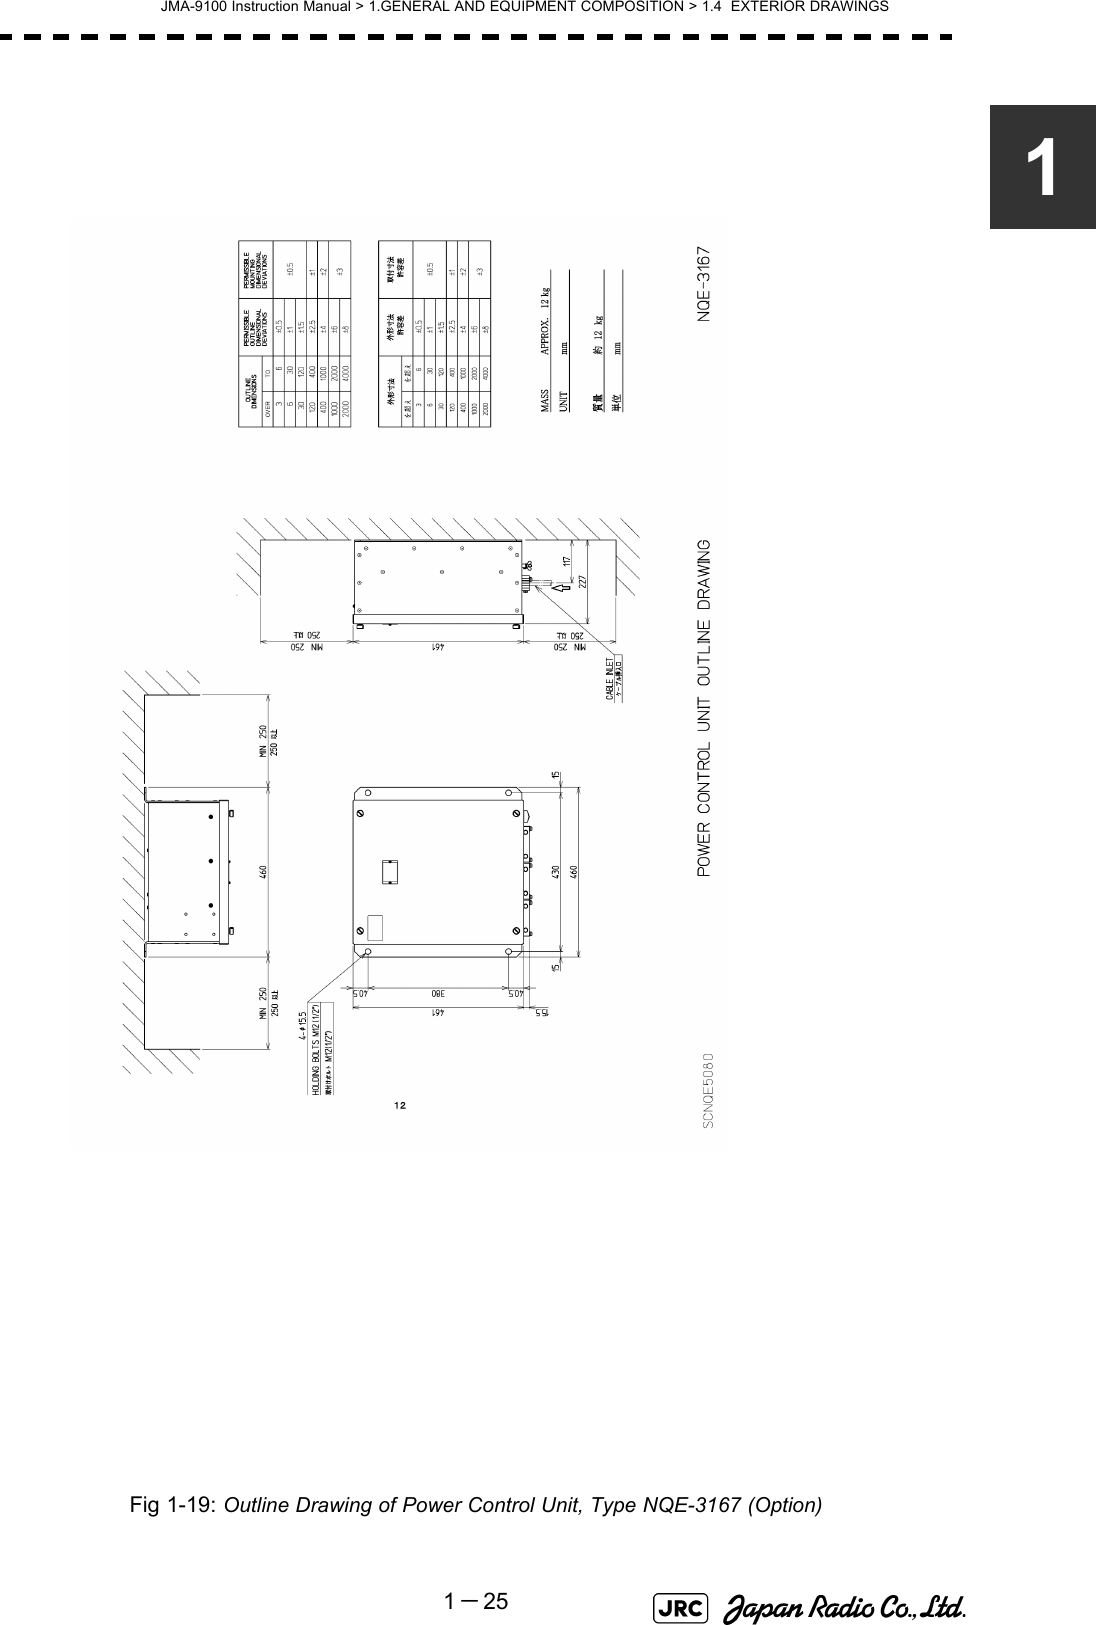 JMA-9100 Instruction Manual &gt; 1.GENERAL AND EQUIPMENT COMPOSITION &gt; 1.4  EXTERIOR DRAWINGS1－251Fig 1-19: Outline Drawing of Power Control Unit, Type NQE-3167 (Option)